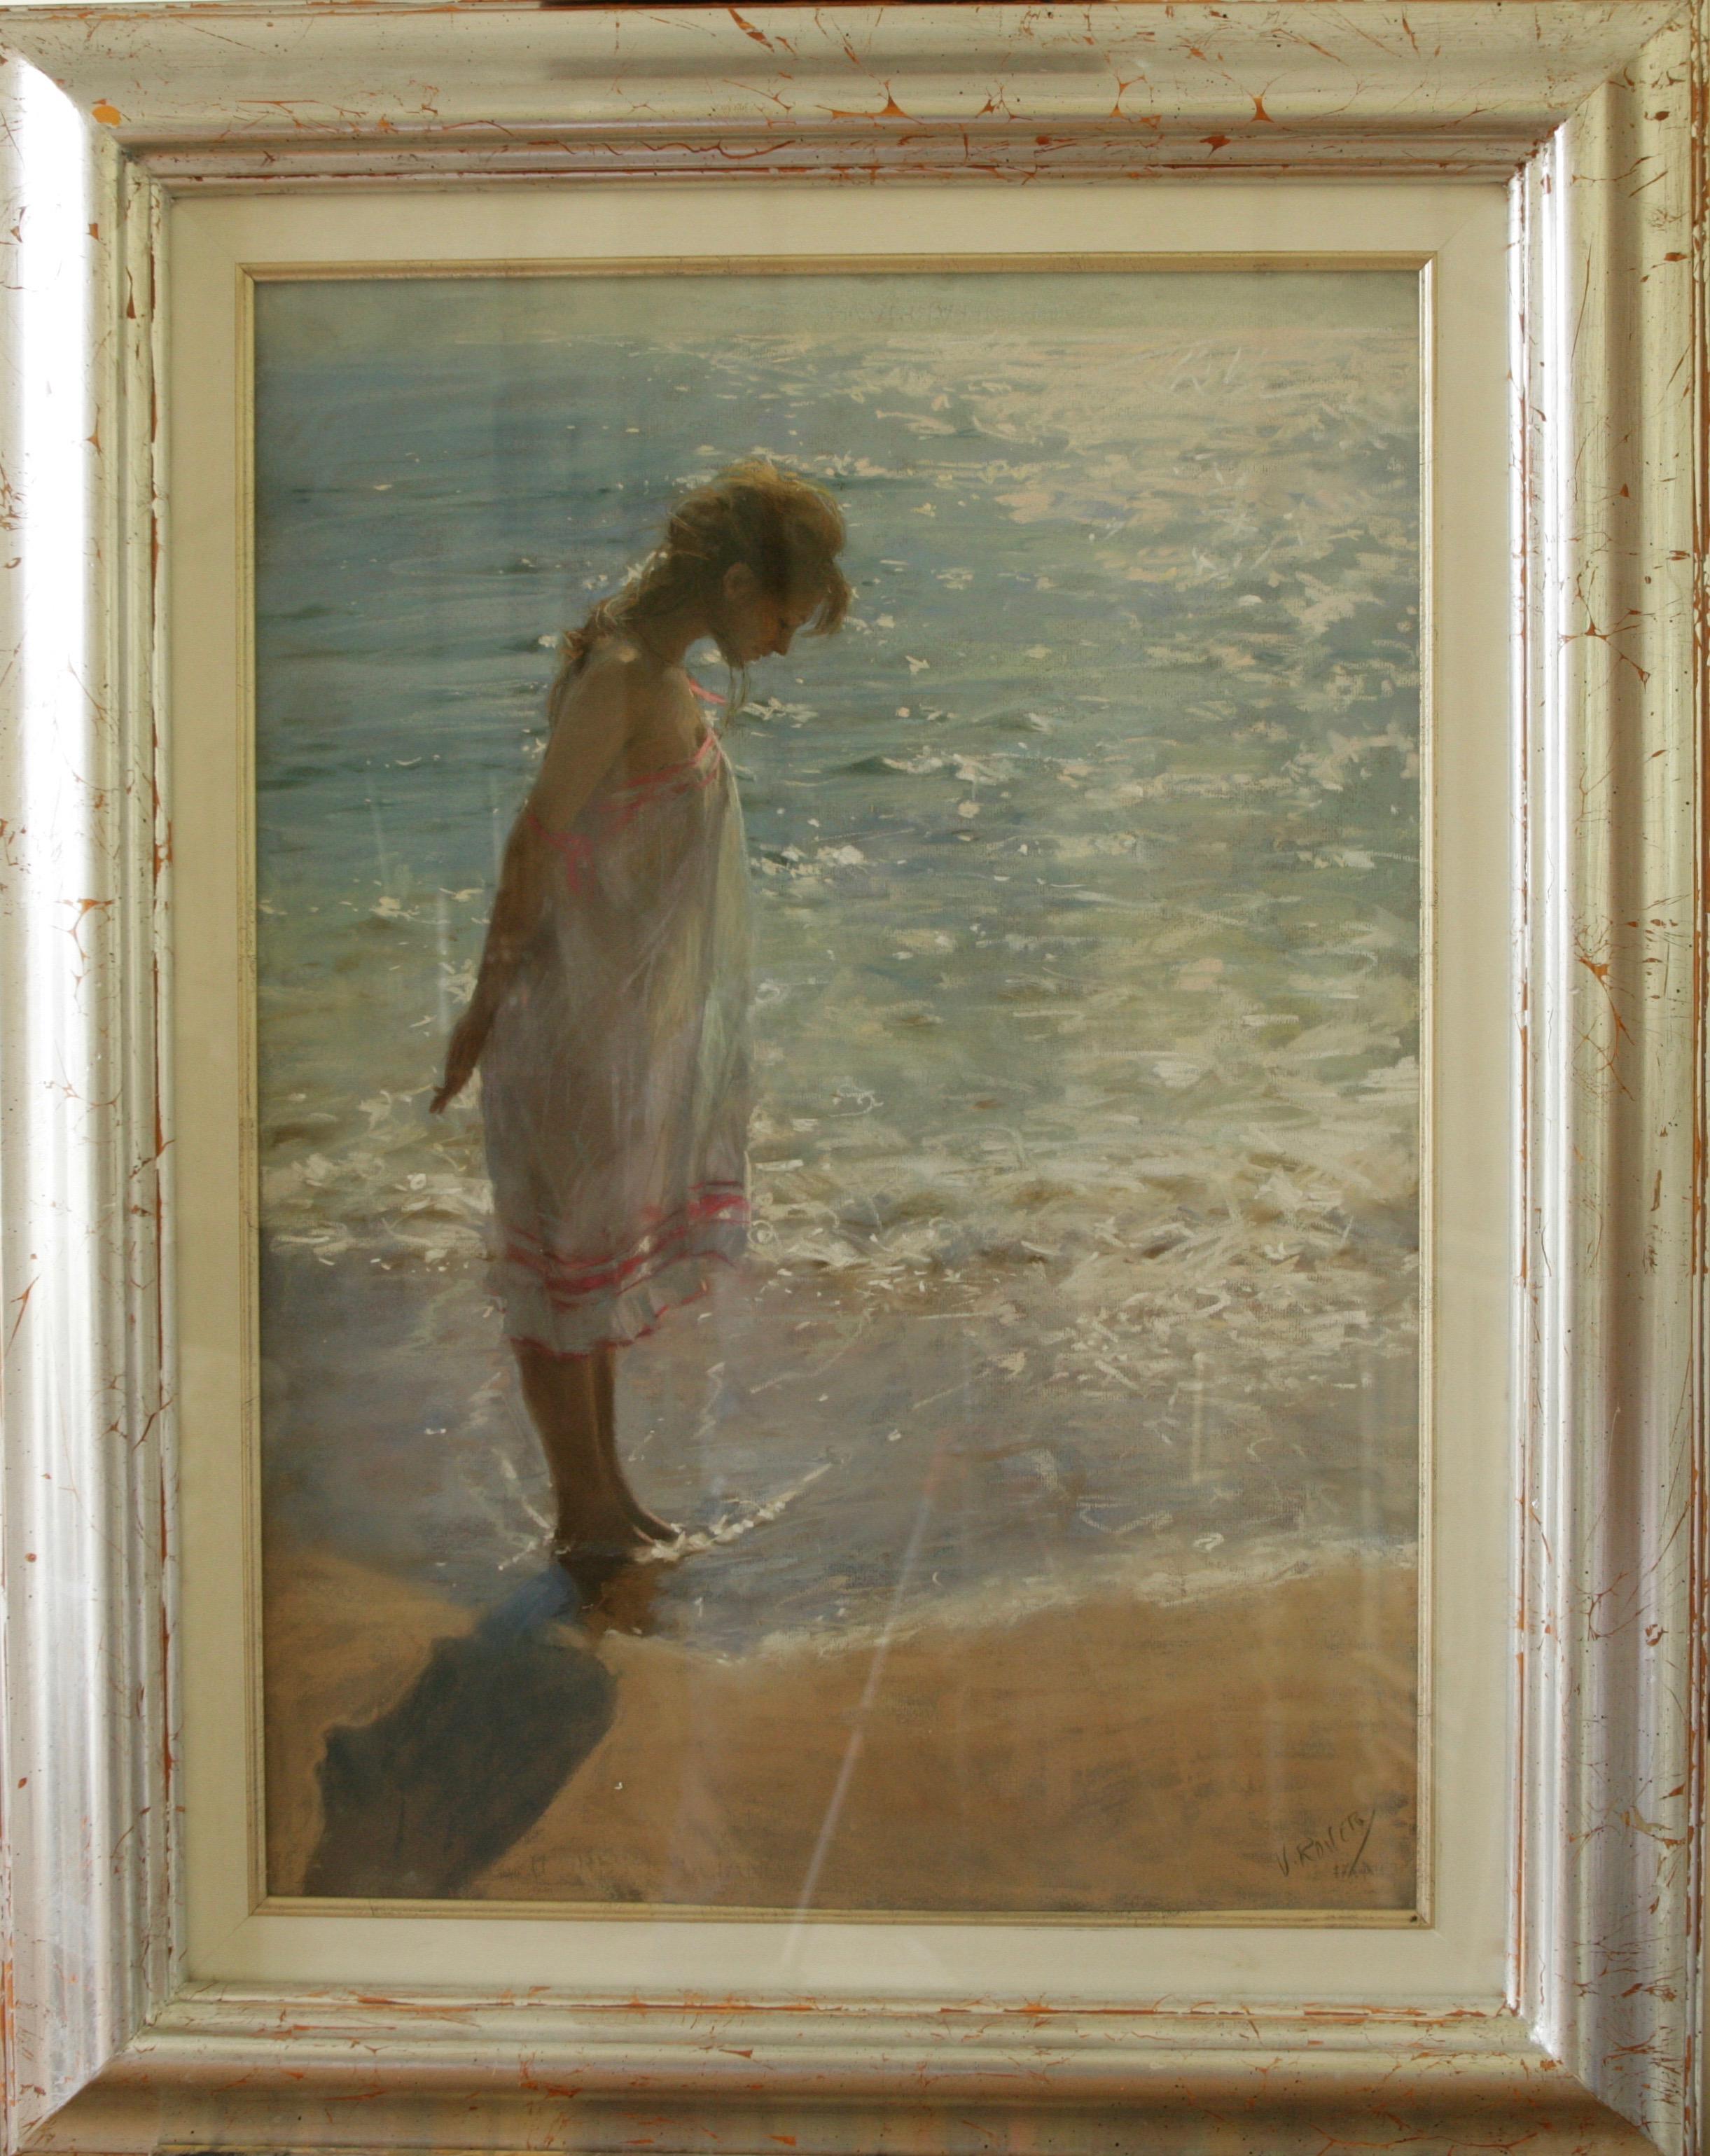 Vicente Romero Redondo (Vicente Romero, born in Madrid, 1956) is a Spanish figurative painter and educator, best known for his pastel depictions of graceful girls at solitary moments in romantic surroundings, adorned in crafty clothing in an art